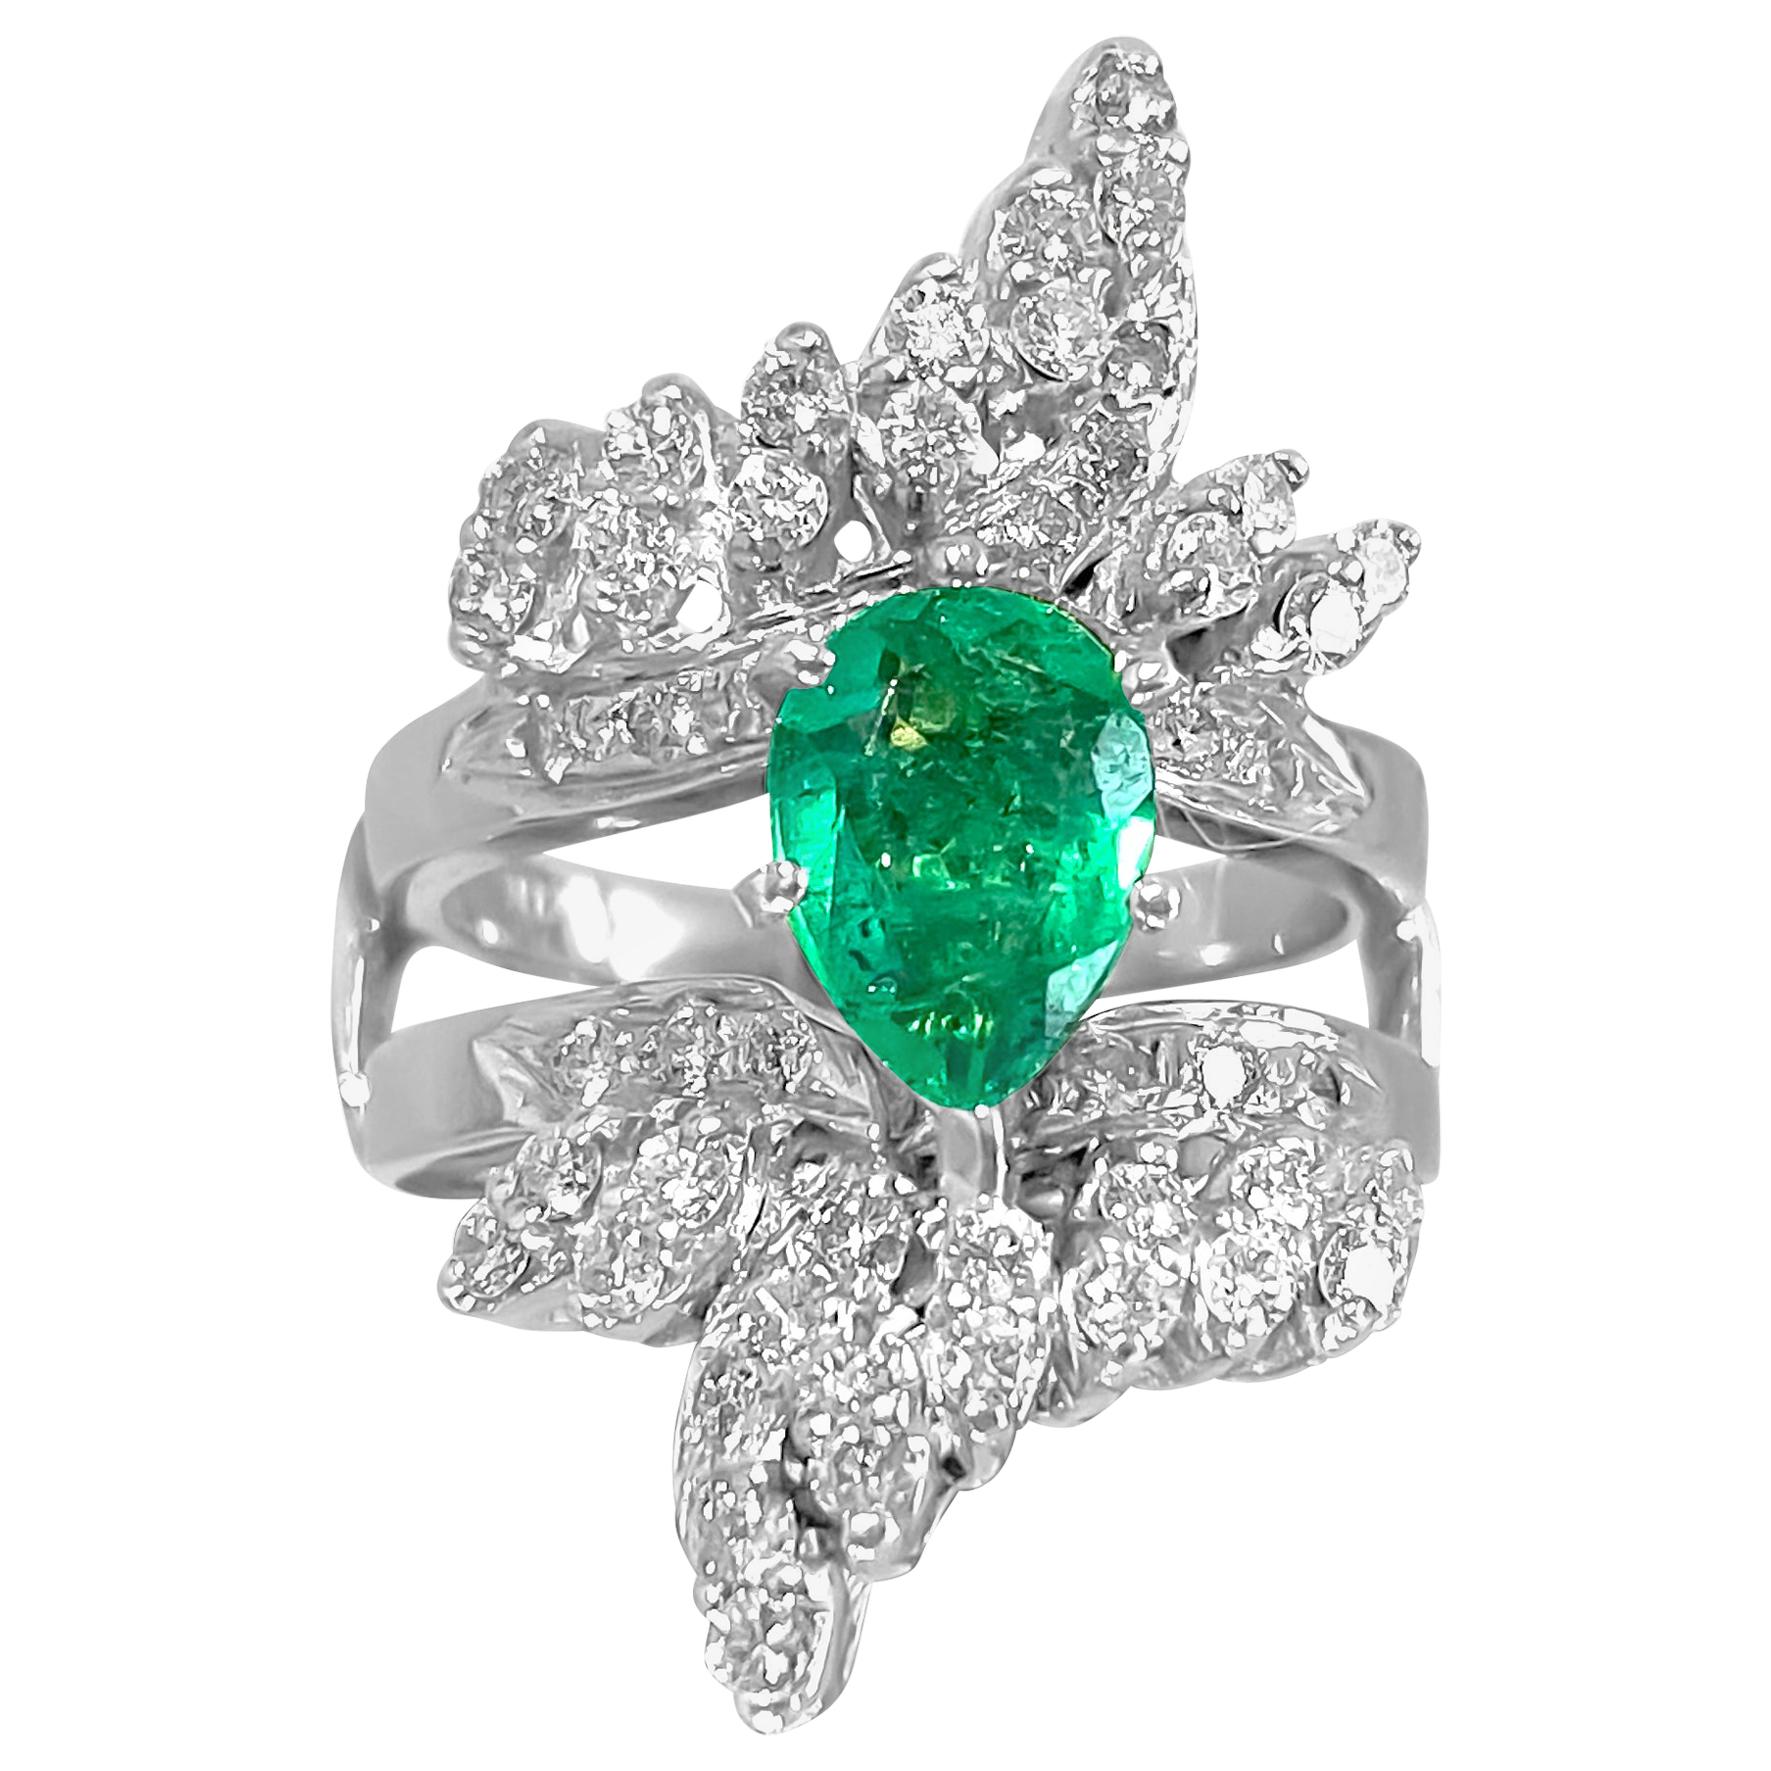 5.50 Carat Colombian Emerald Diamond Cocktail Ring 14 Karat White Gold For Sale